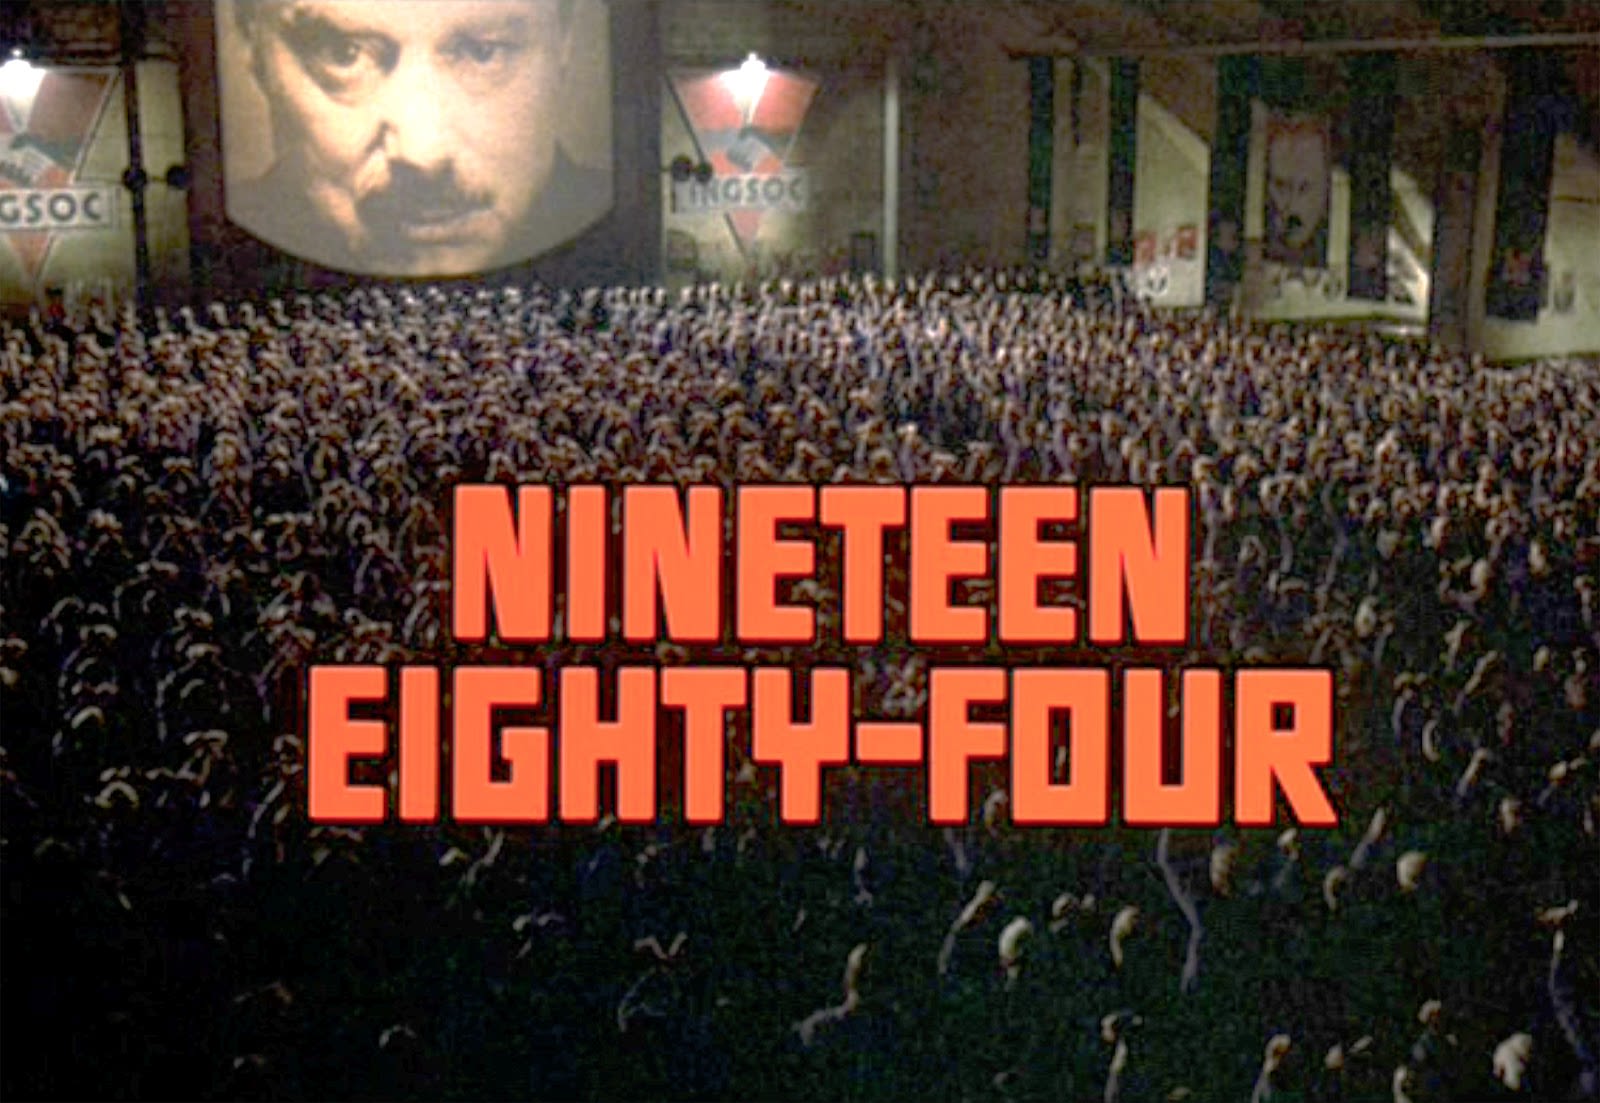 Scene from 1984 the film where hundreds of people are gathered, 'Nineteen Eight-Four' written in red capital letters across the screen